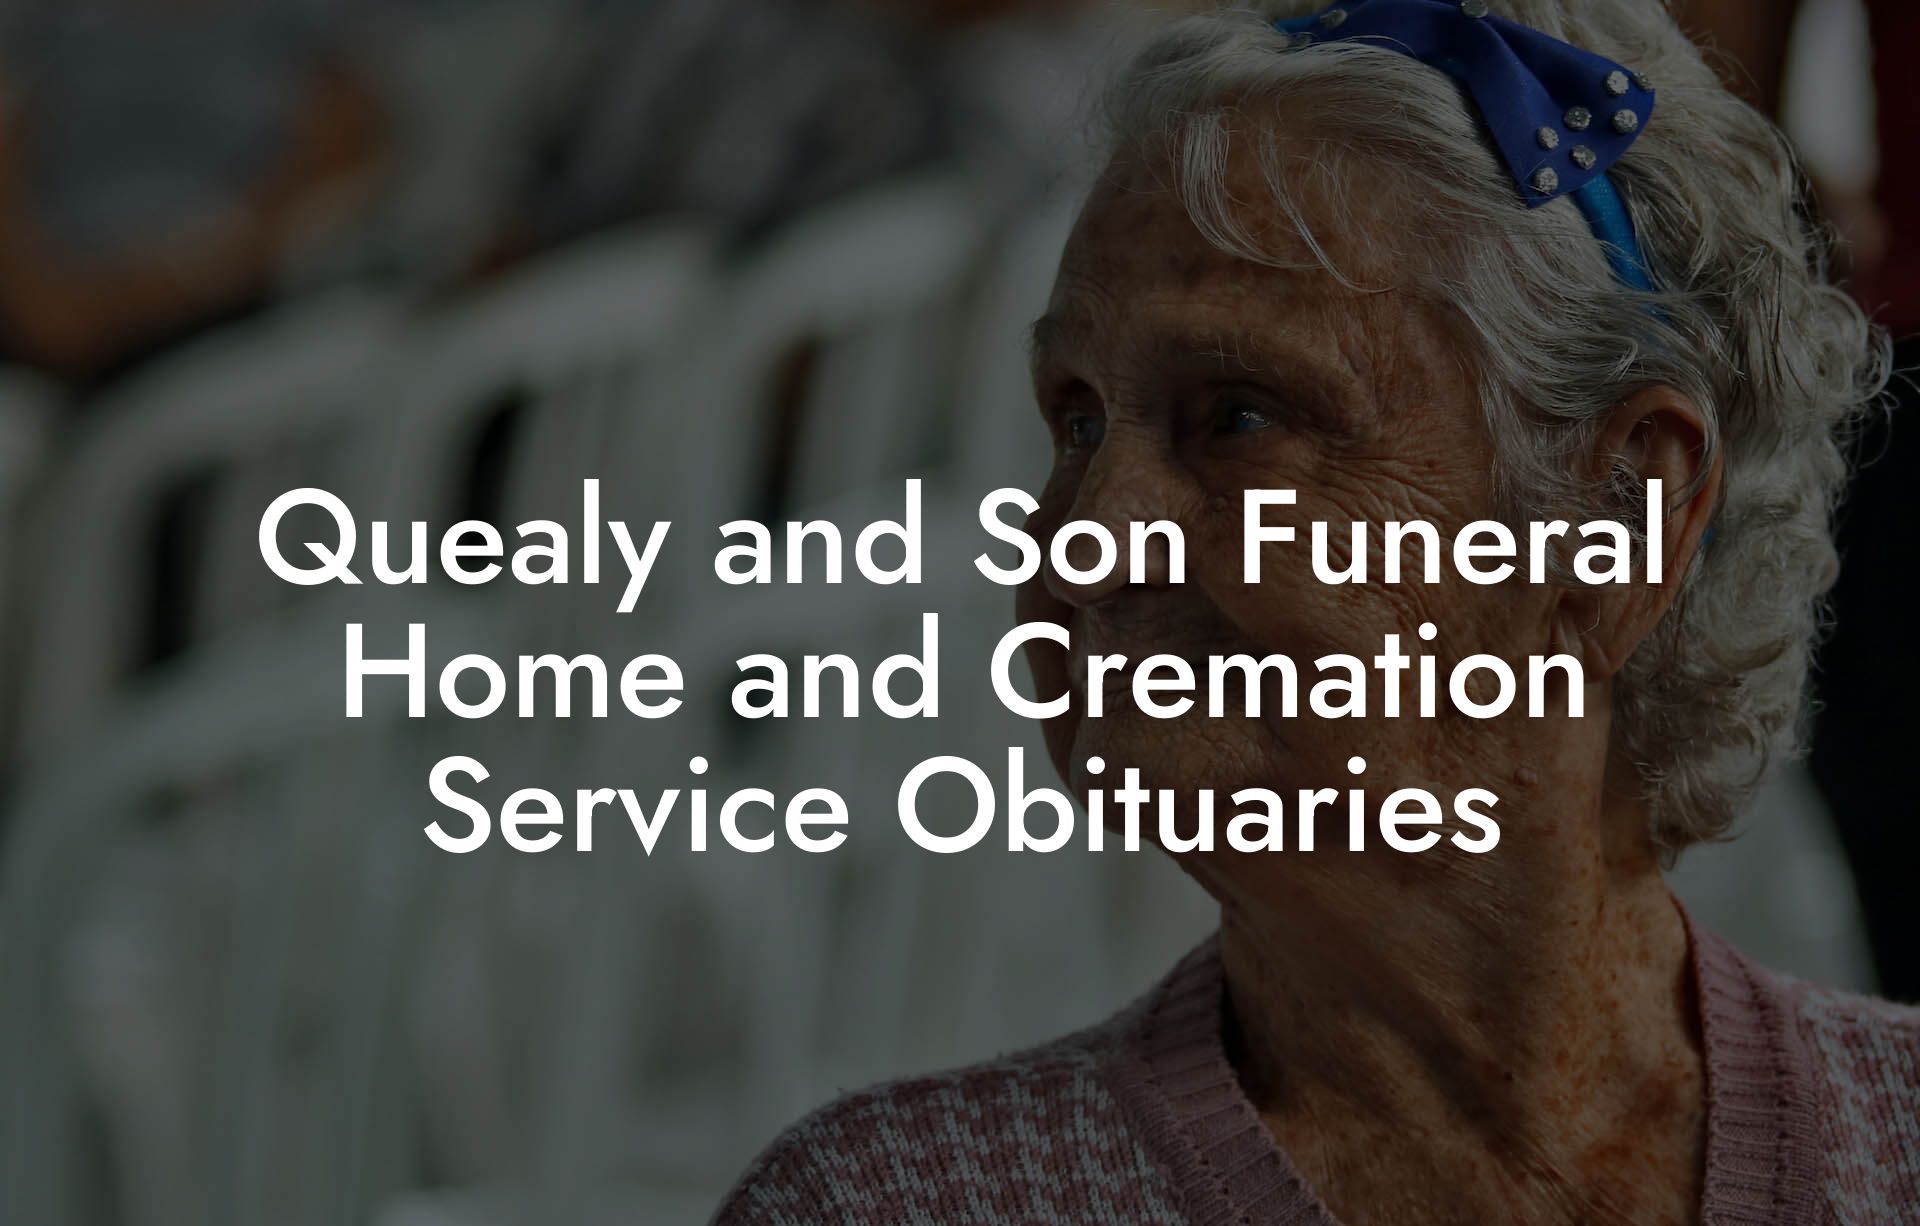 Quealy and Son Funeral Home and Cremation Service Obituaries